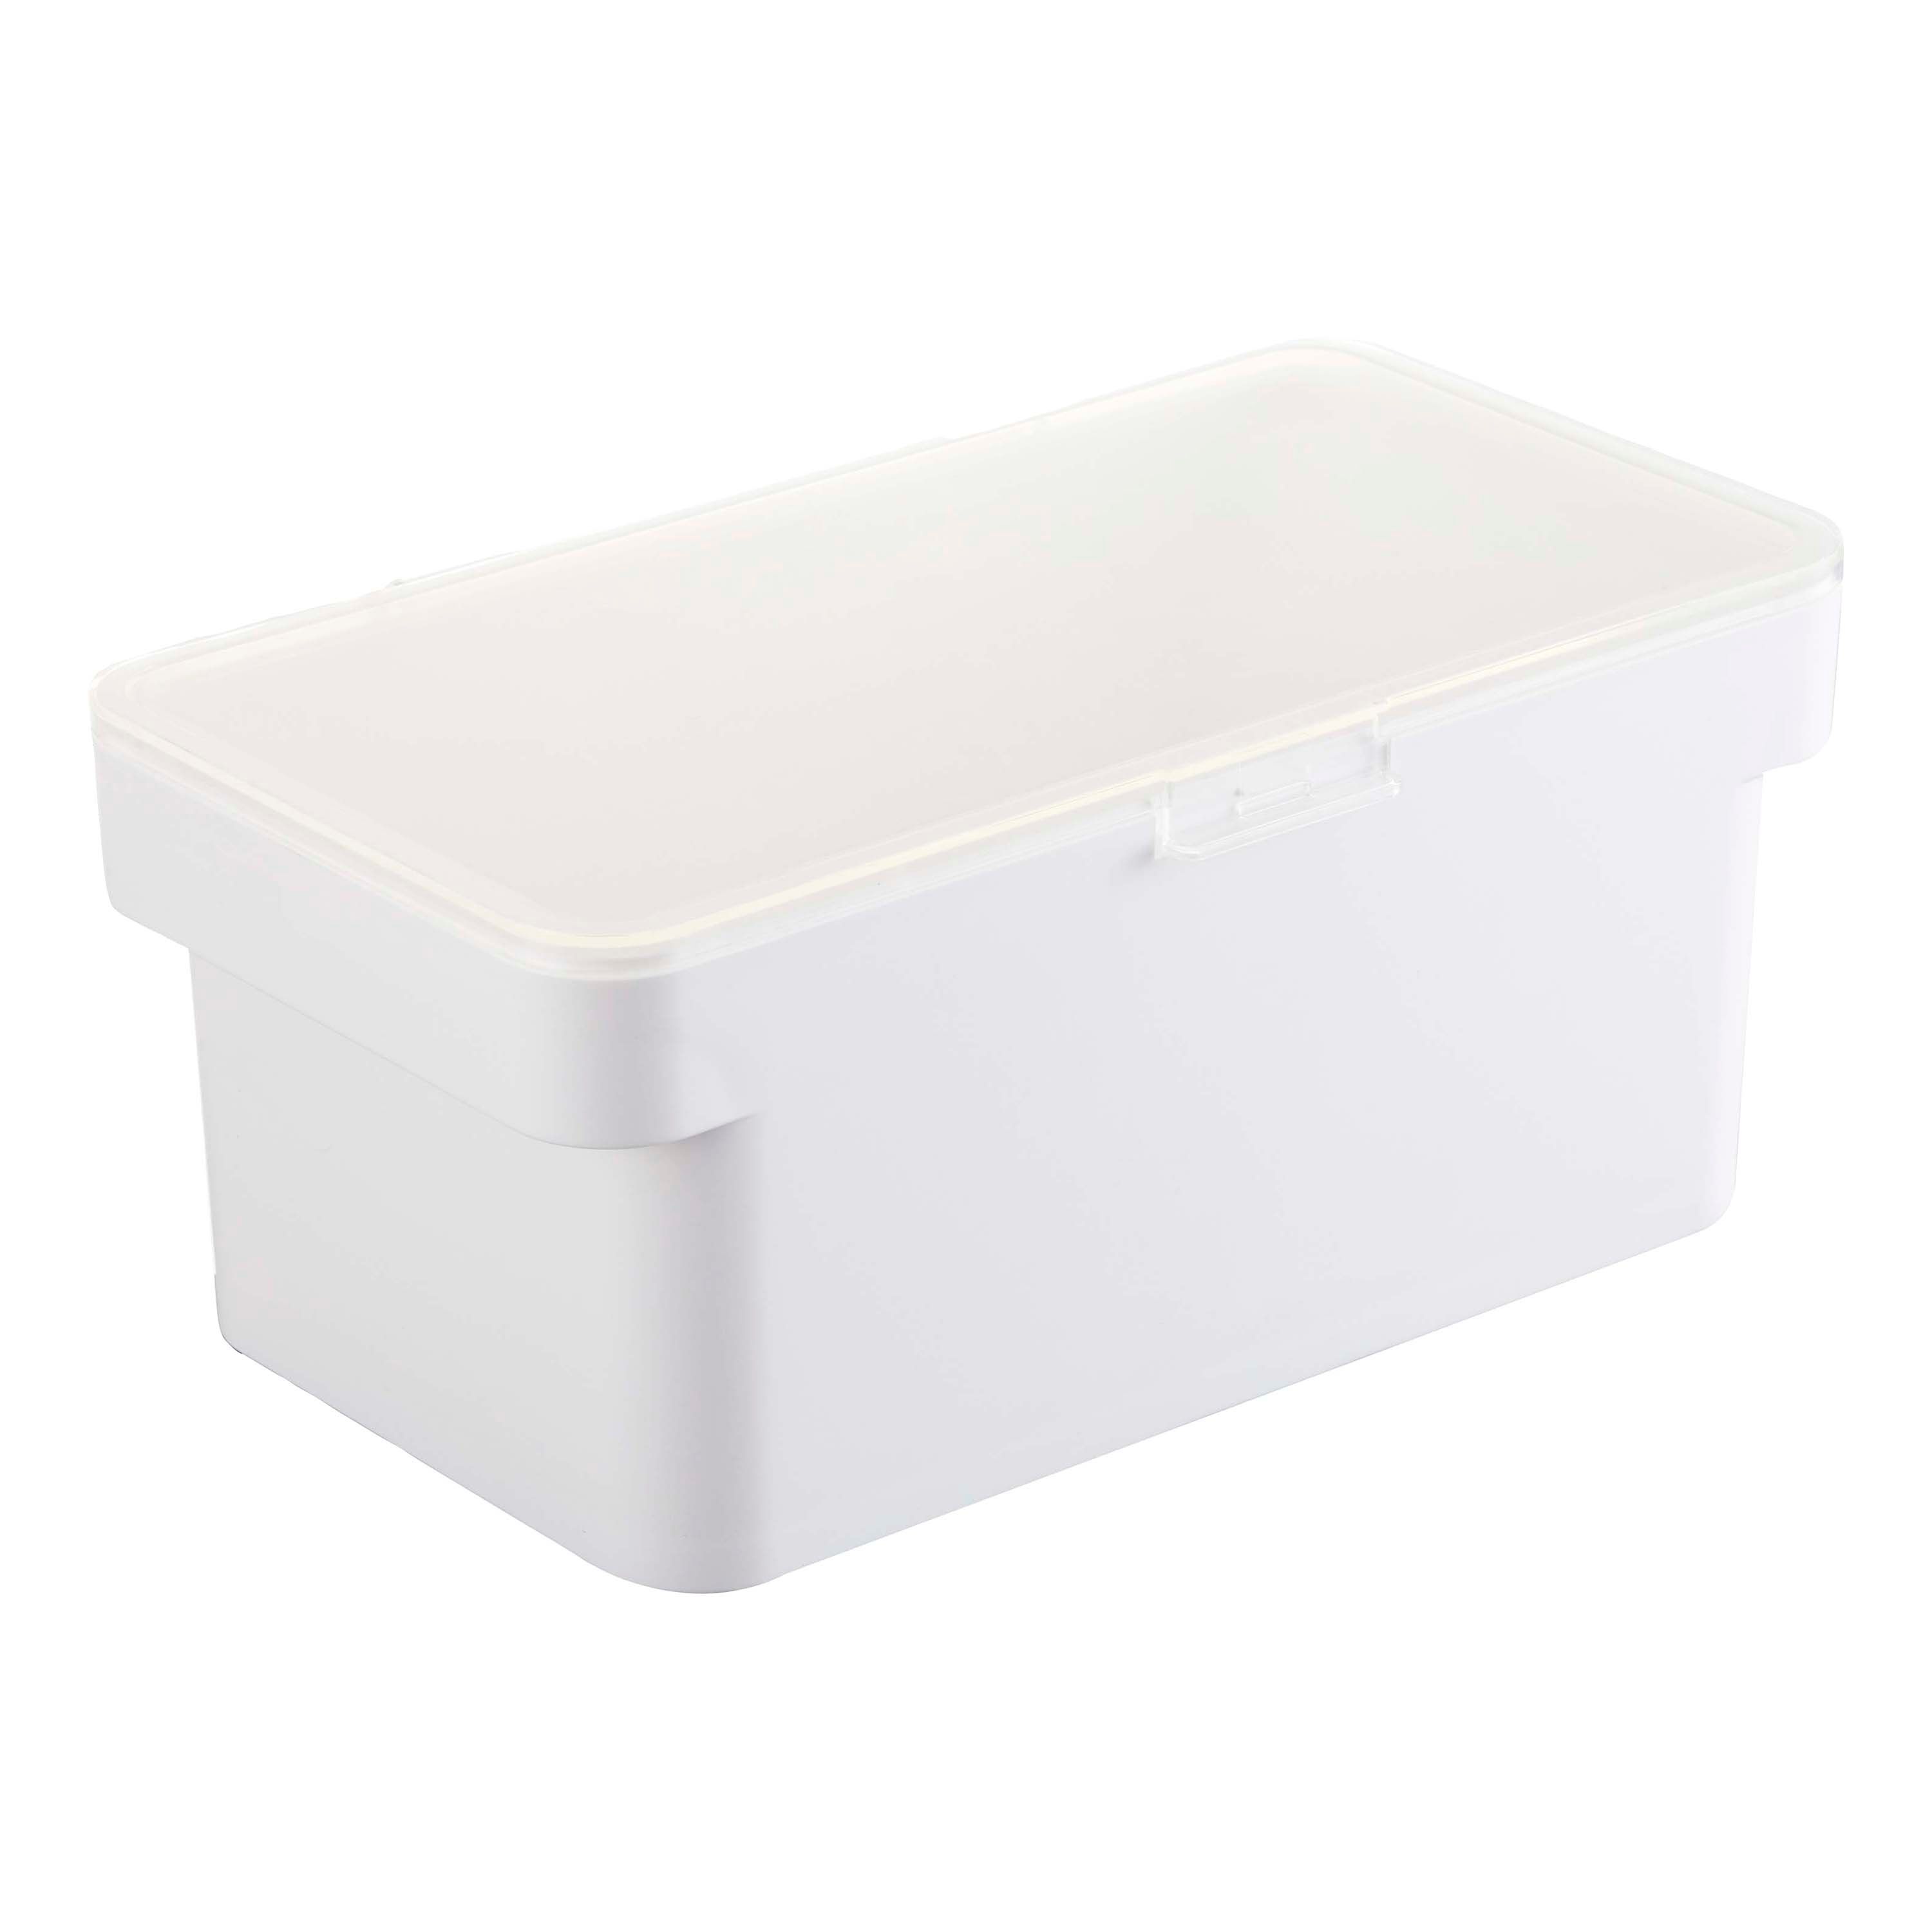 https://www.containerstore.com/catalogimages/488873/7h4AVyp0.jpg